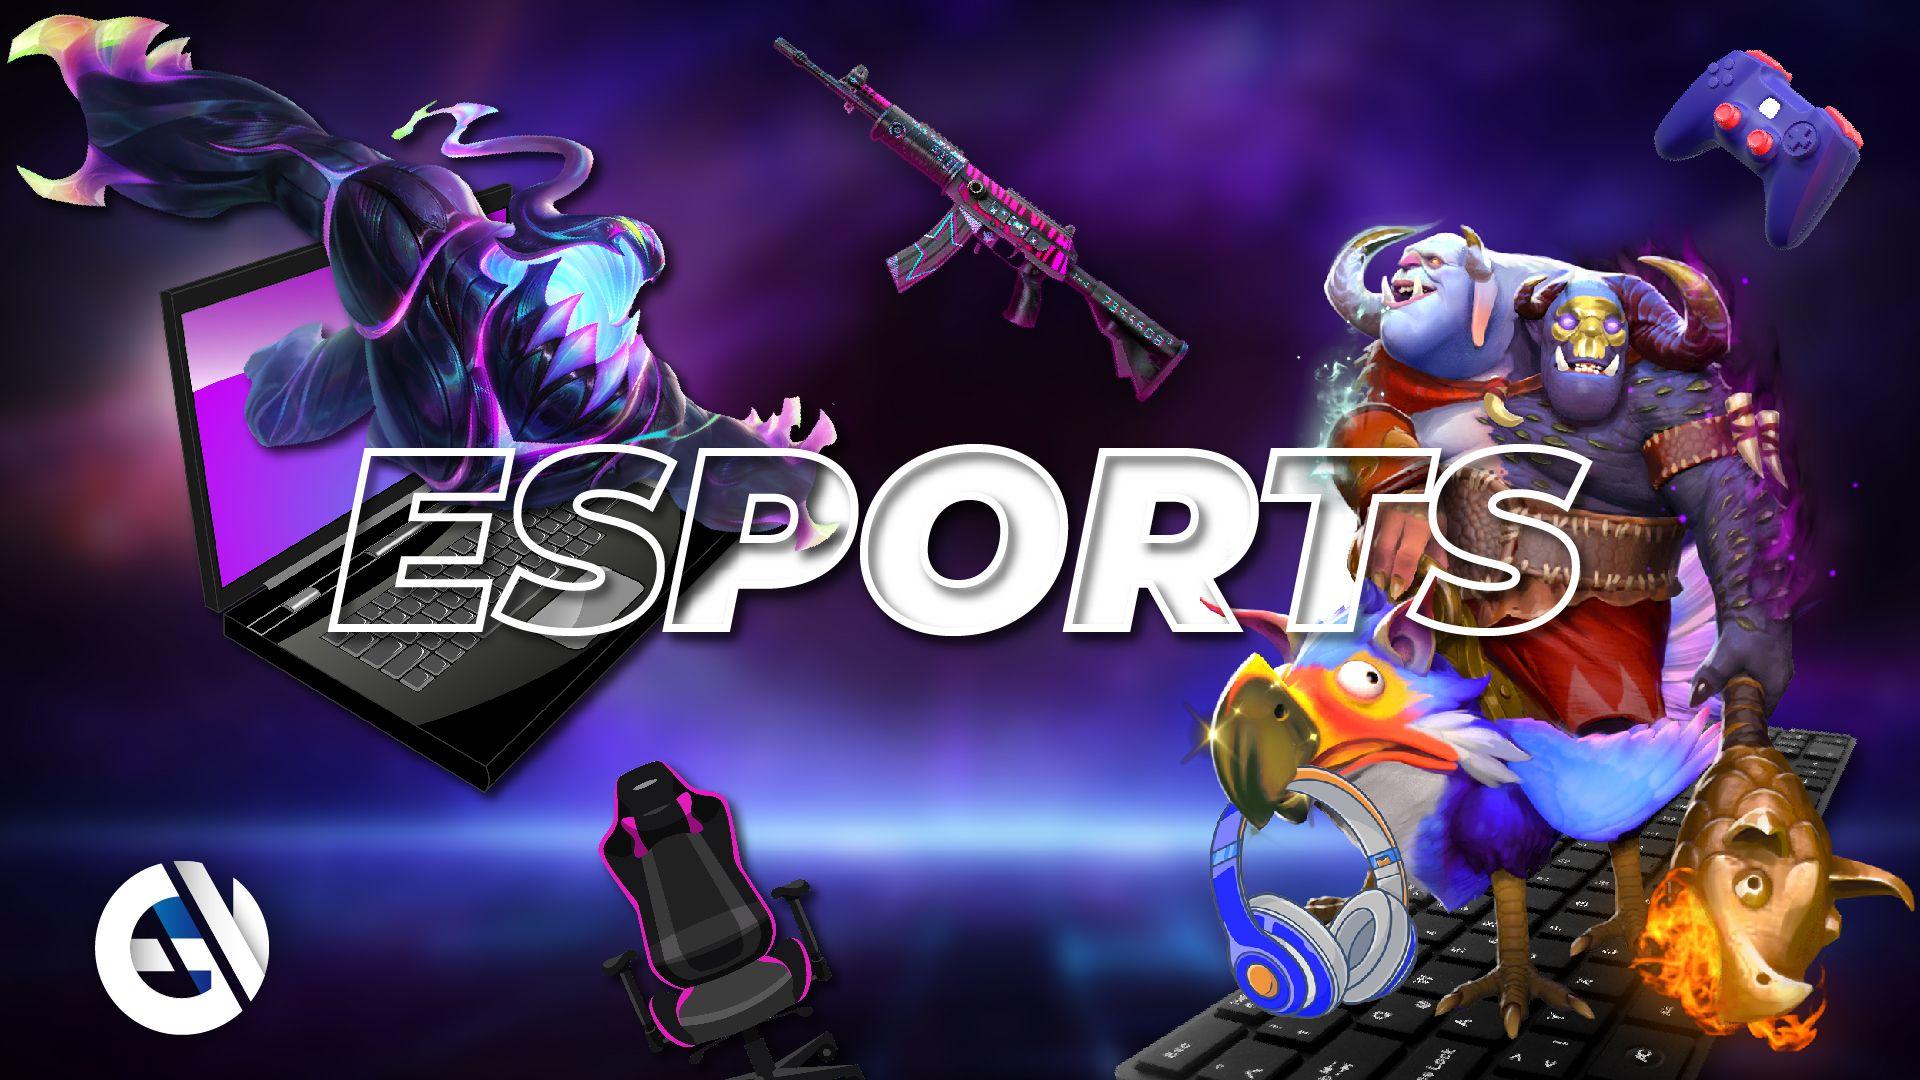 Does the Esports Market Need More Light-hearted Titles to Expand Its Audience?